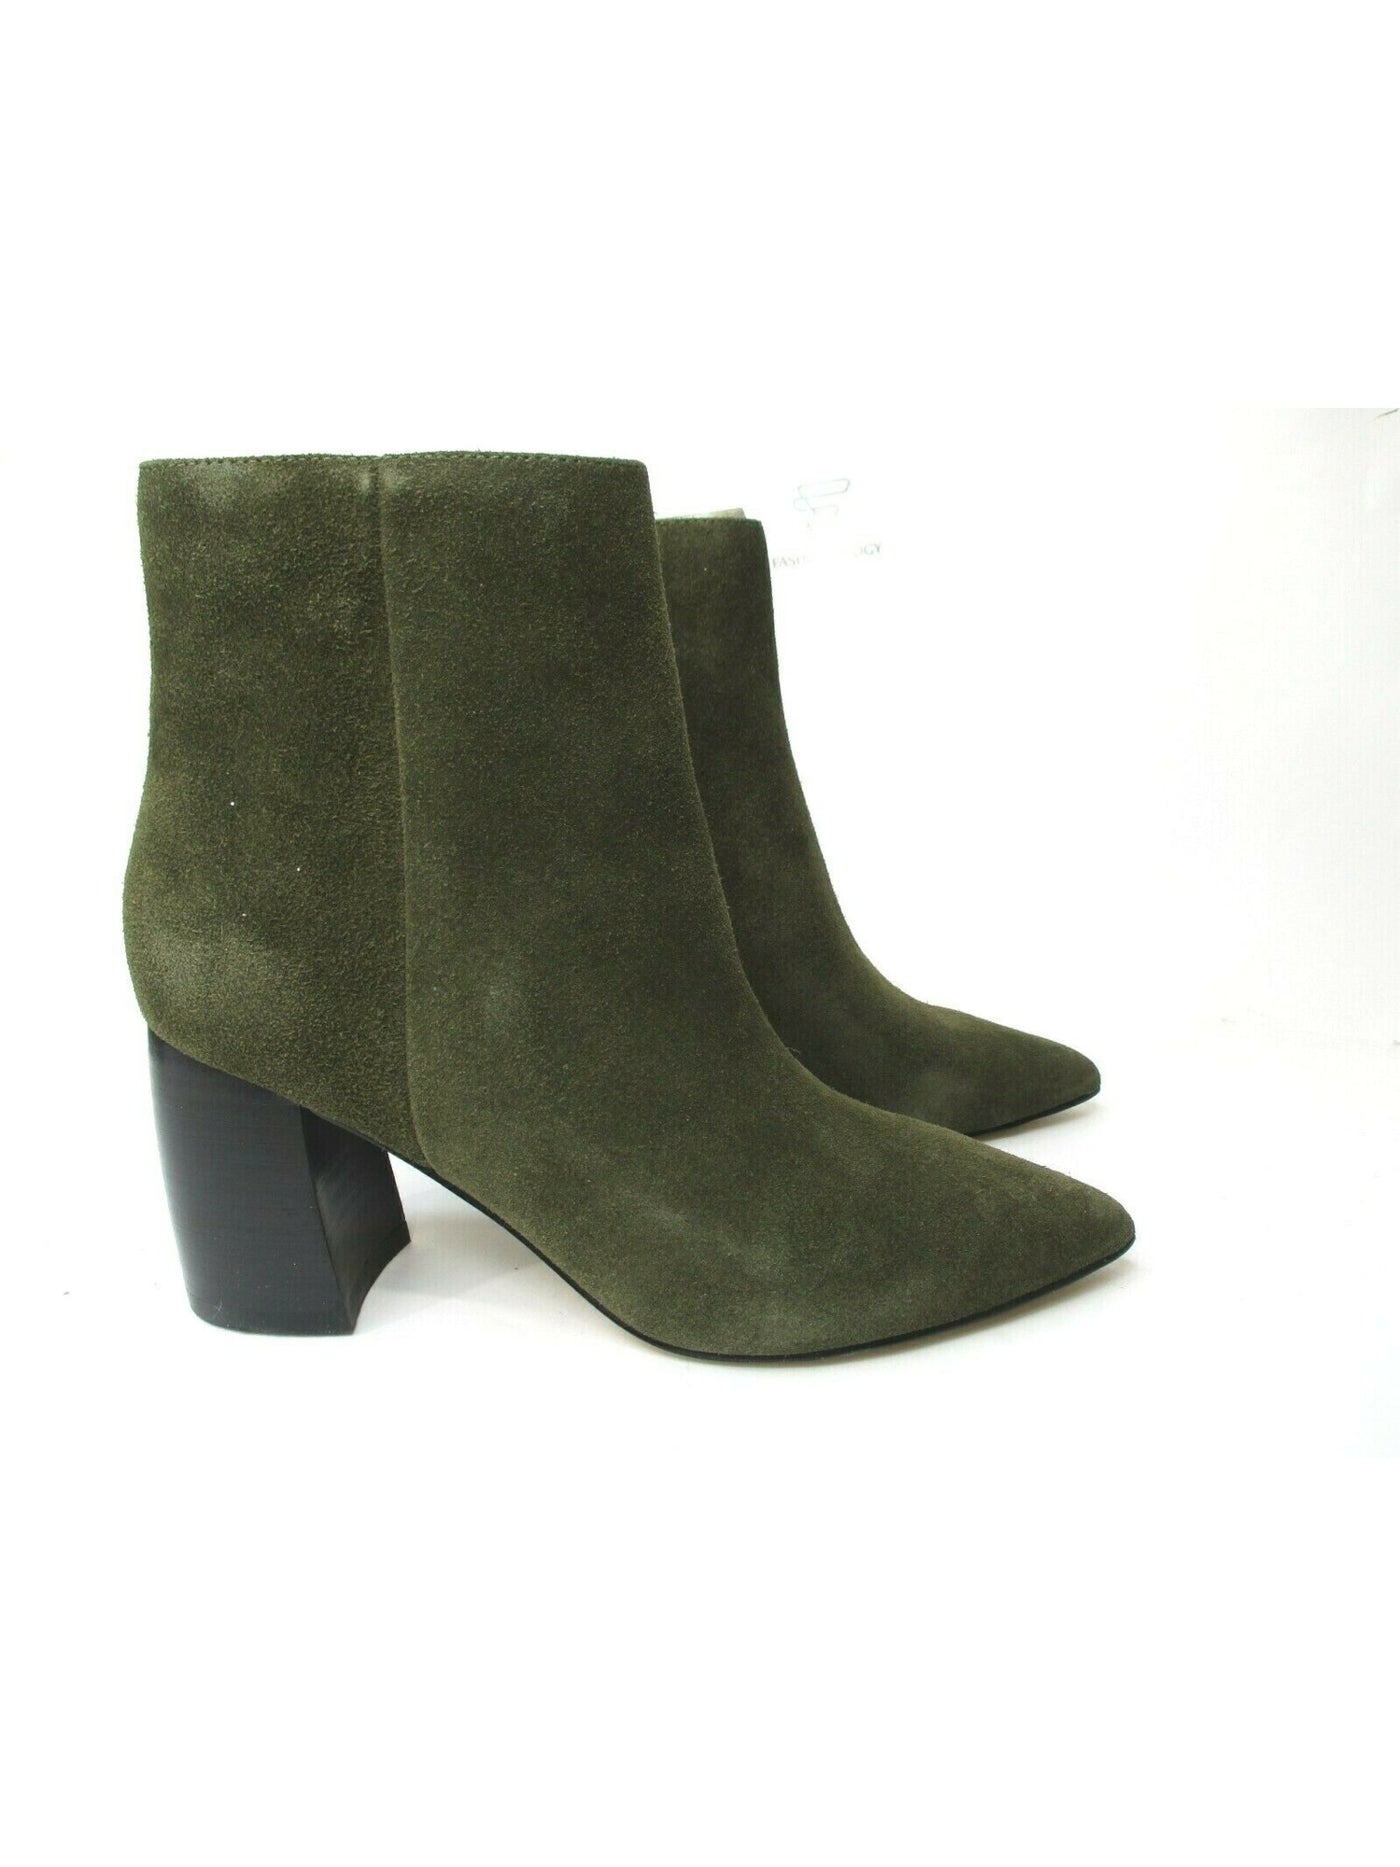 MARC FISHER Womens Green Cushioned Retire Pointed Toe Block Heel Zip-Up Leather Booties 5